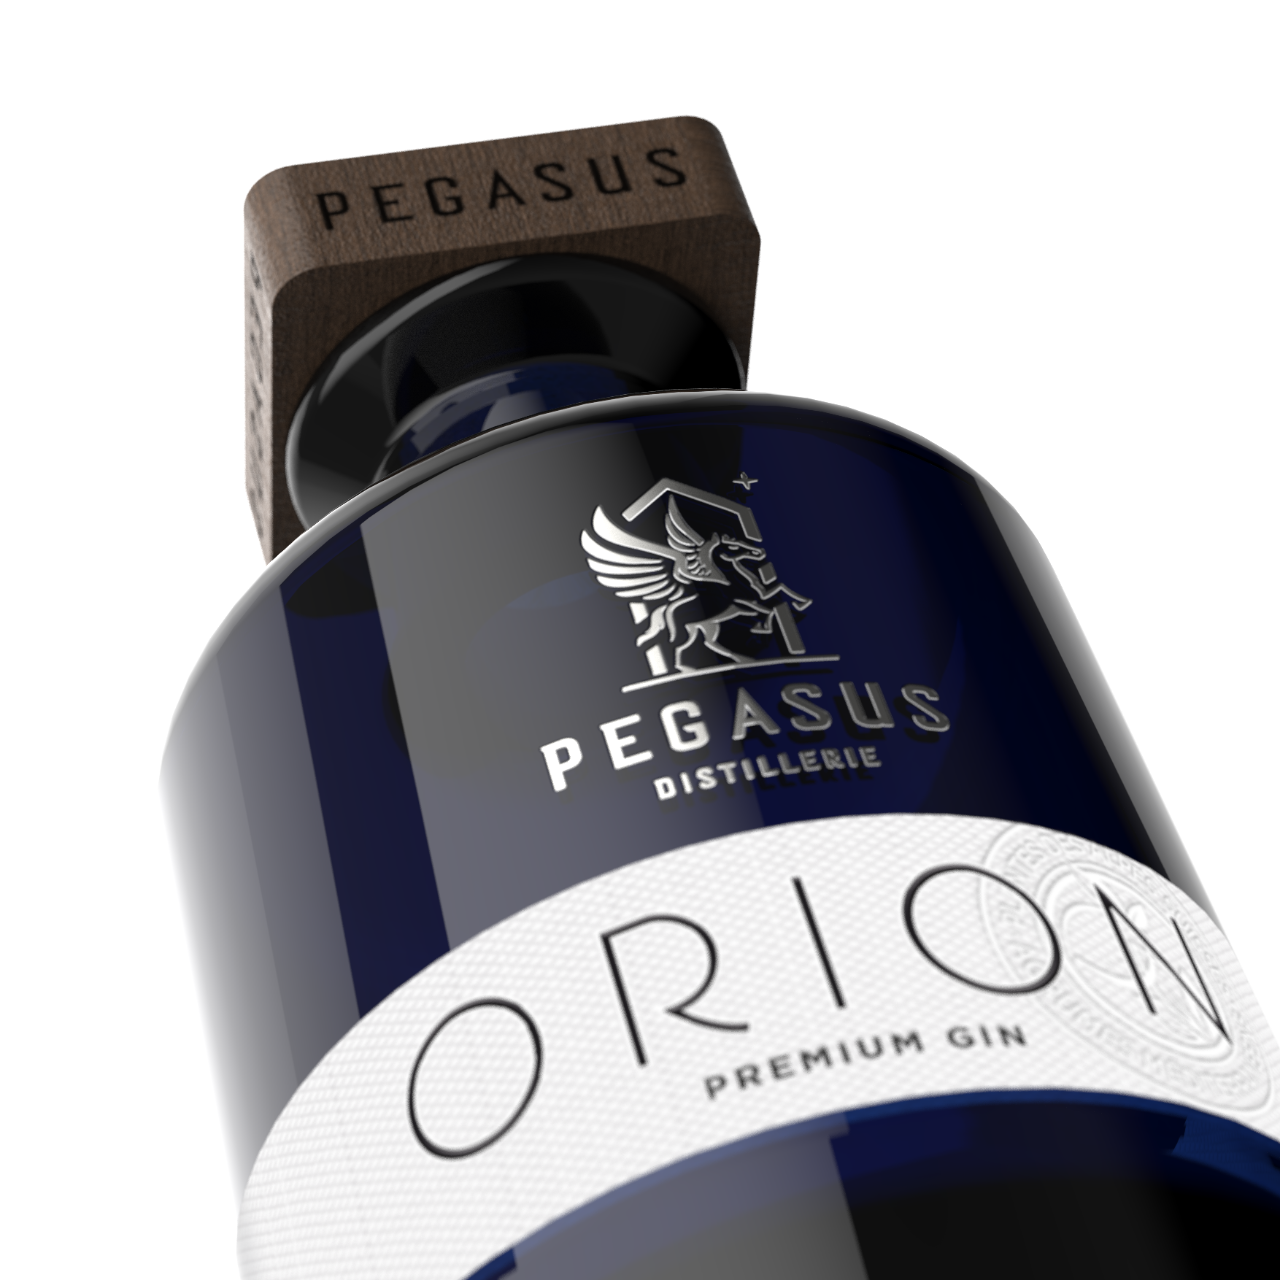 Orion Gin Packaging